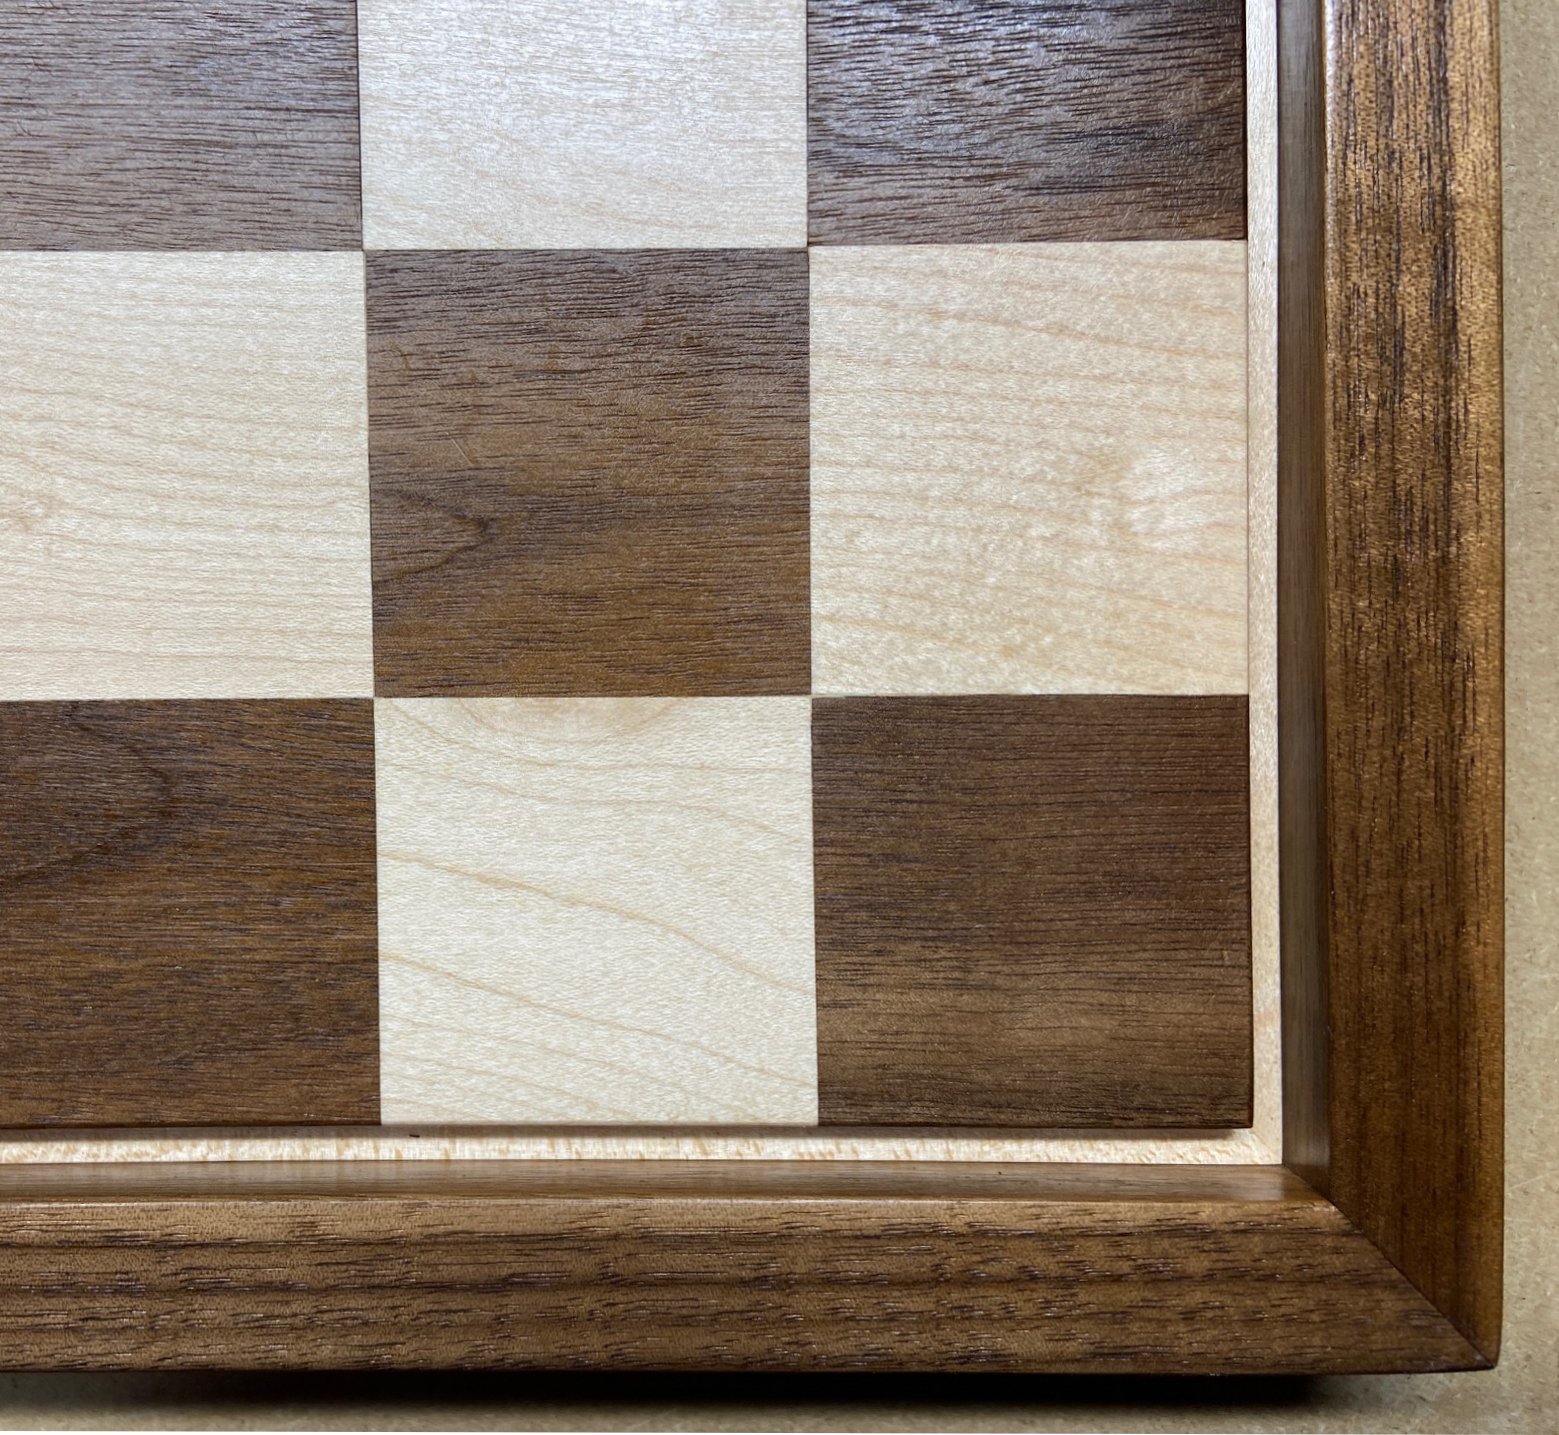 Board #005 – Walnut and Maple (Detail)